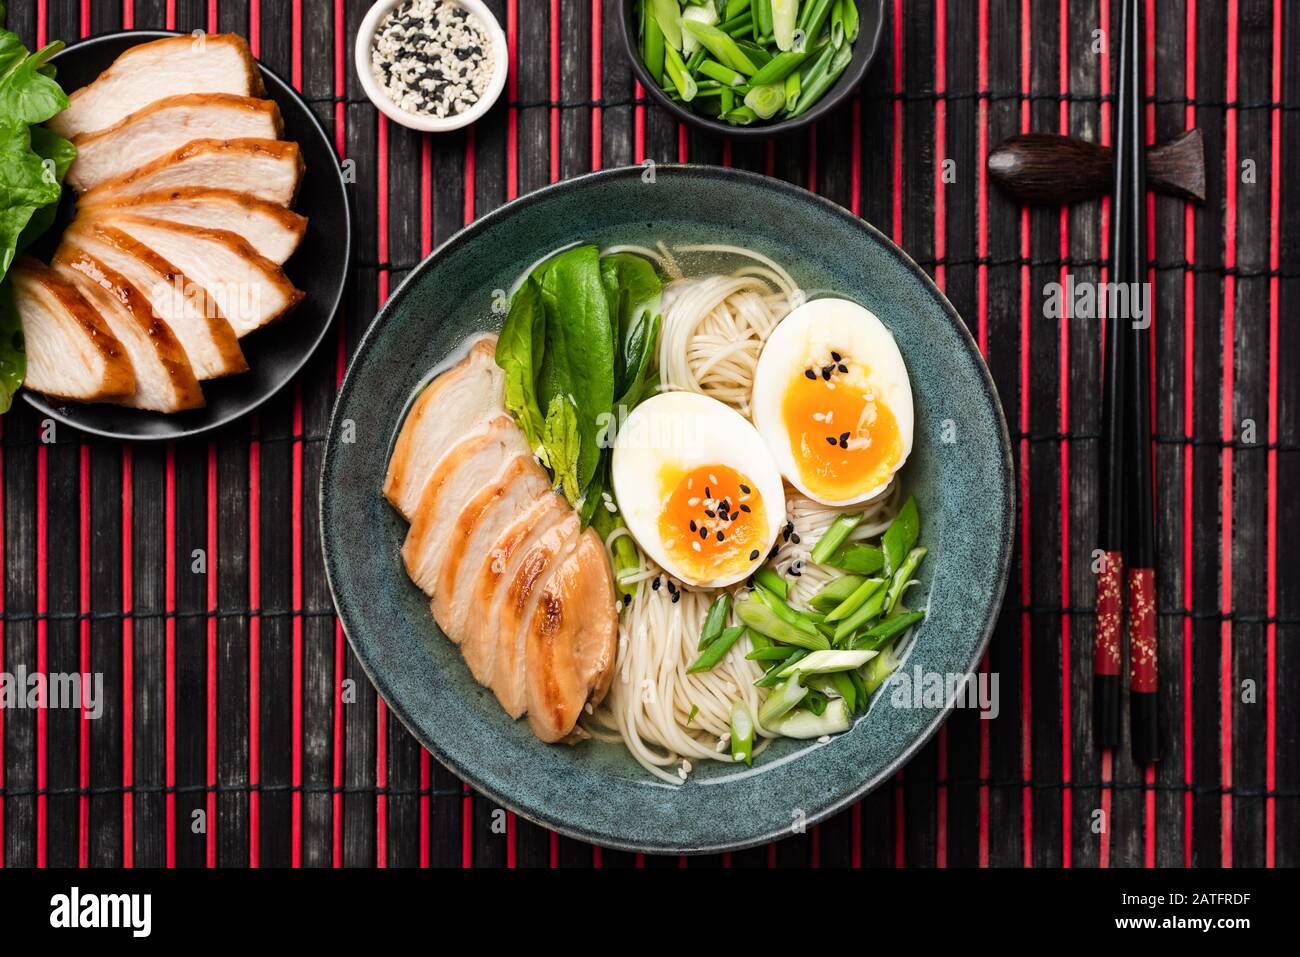 Asian Noodle Soup Ramen With Chicken And Egg Served In Bowl On Bamboo Mat. Top View Stock Photo